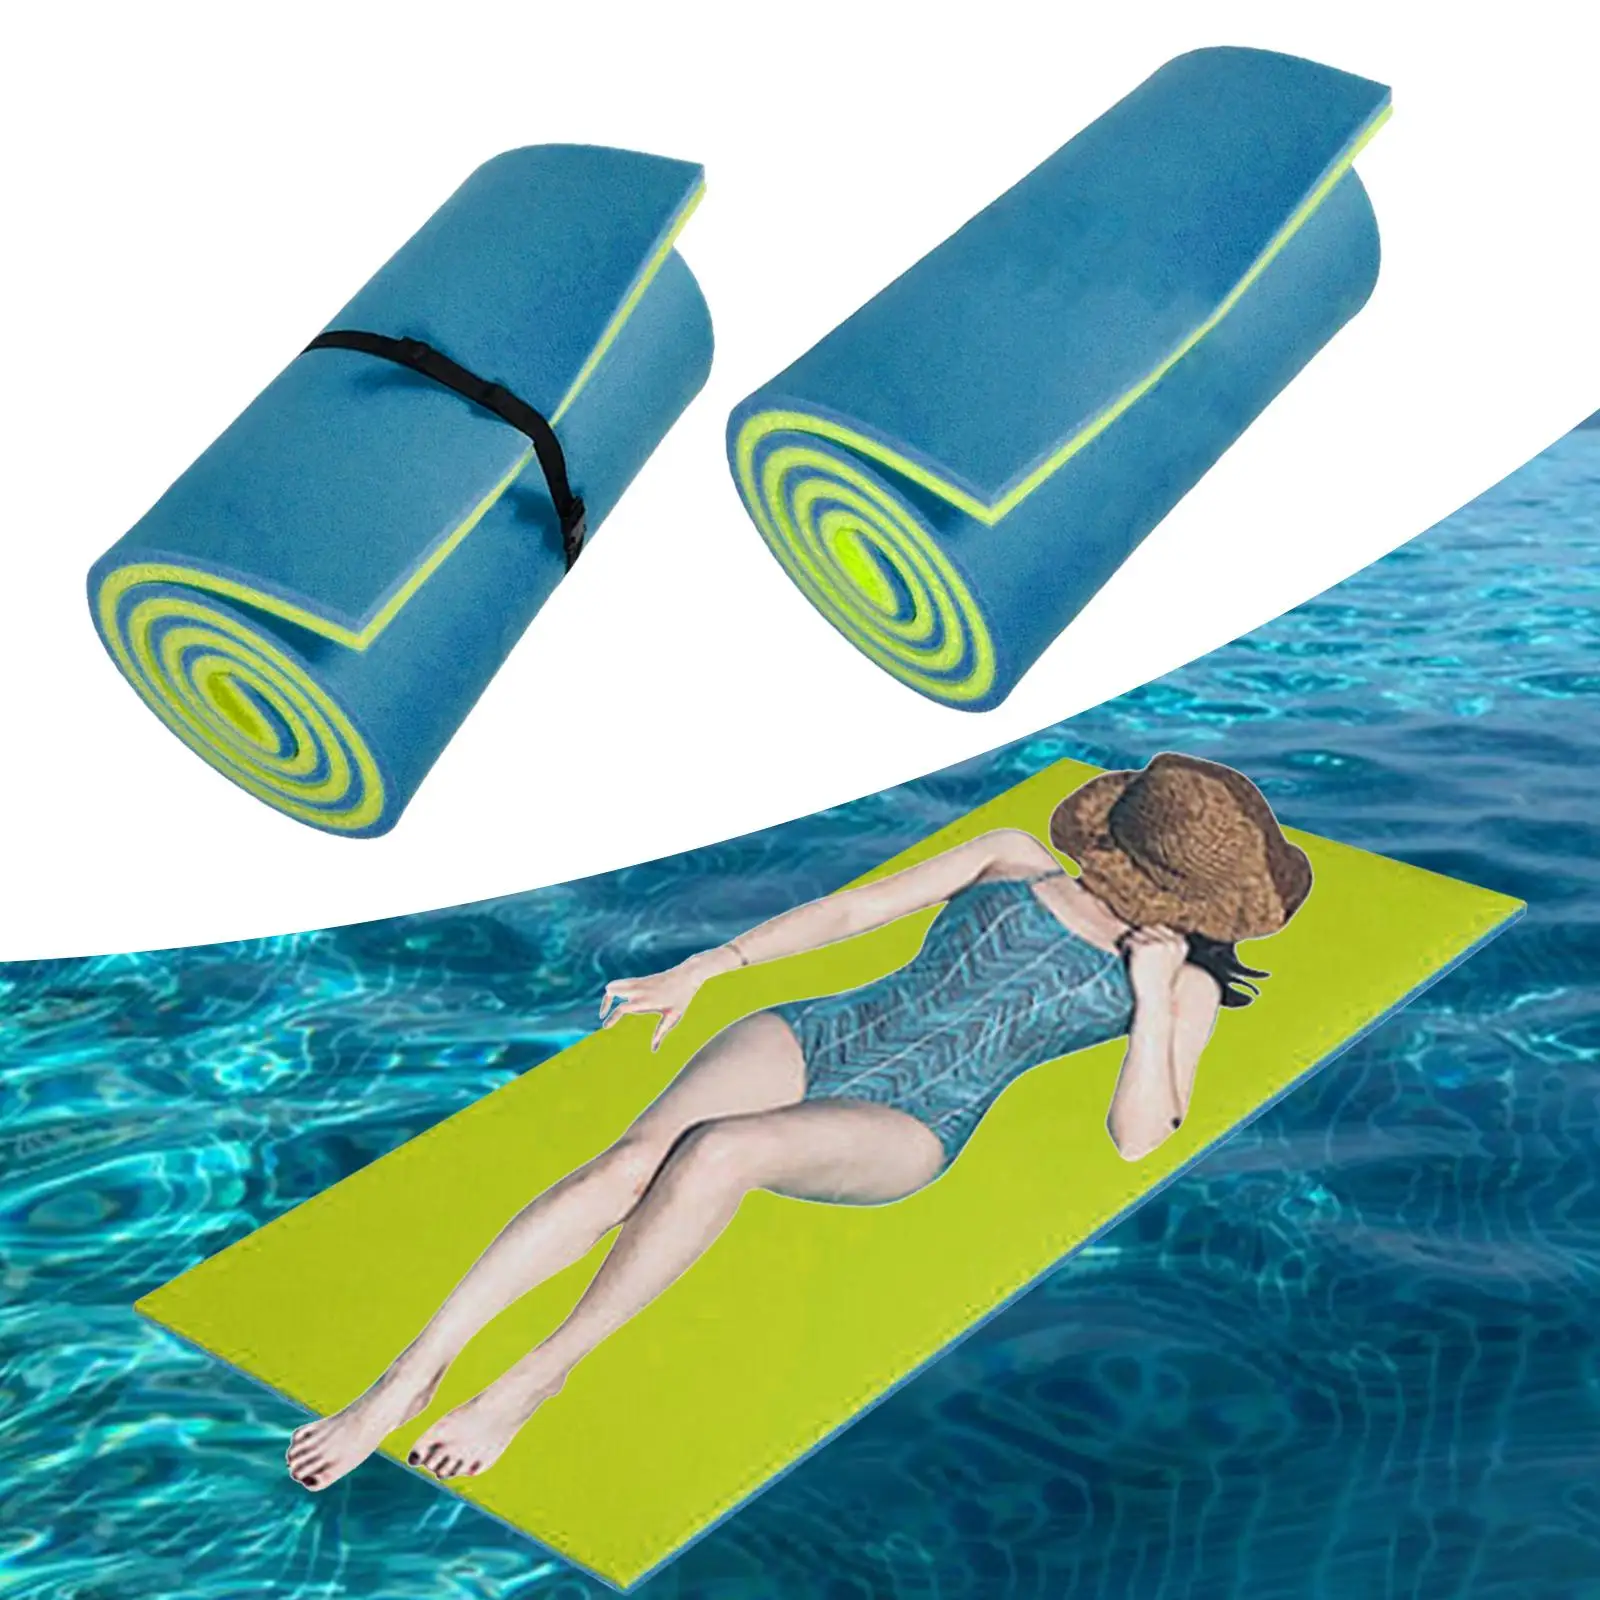 Water Floating Mat Lounge Mattress Pool Float Raft High Density Durable Adults Float Mat Bed for Outside Lake Party Summer